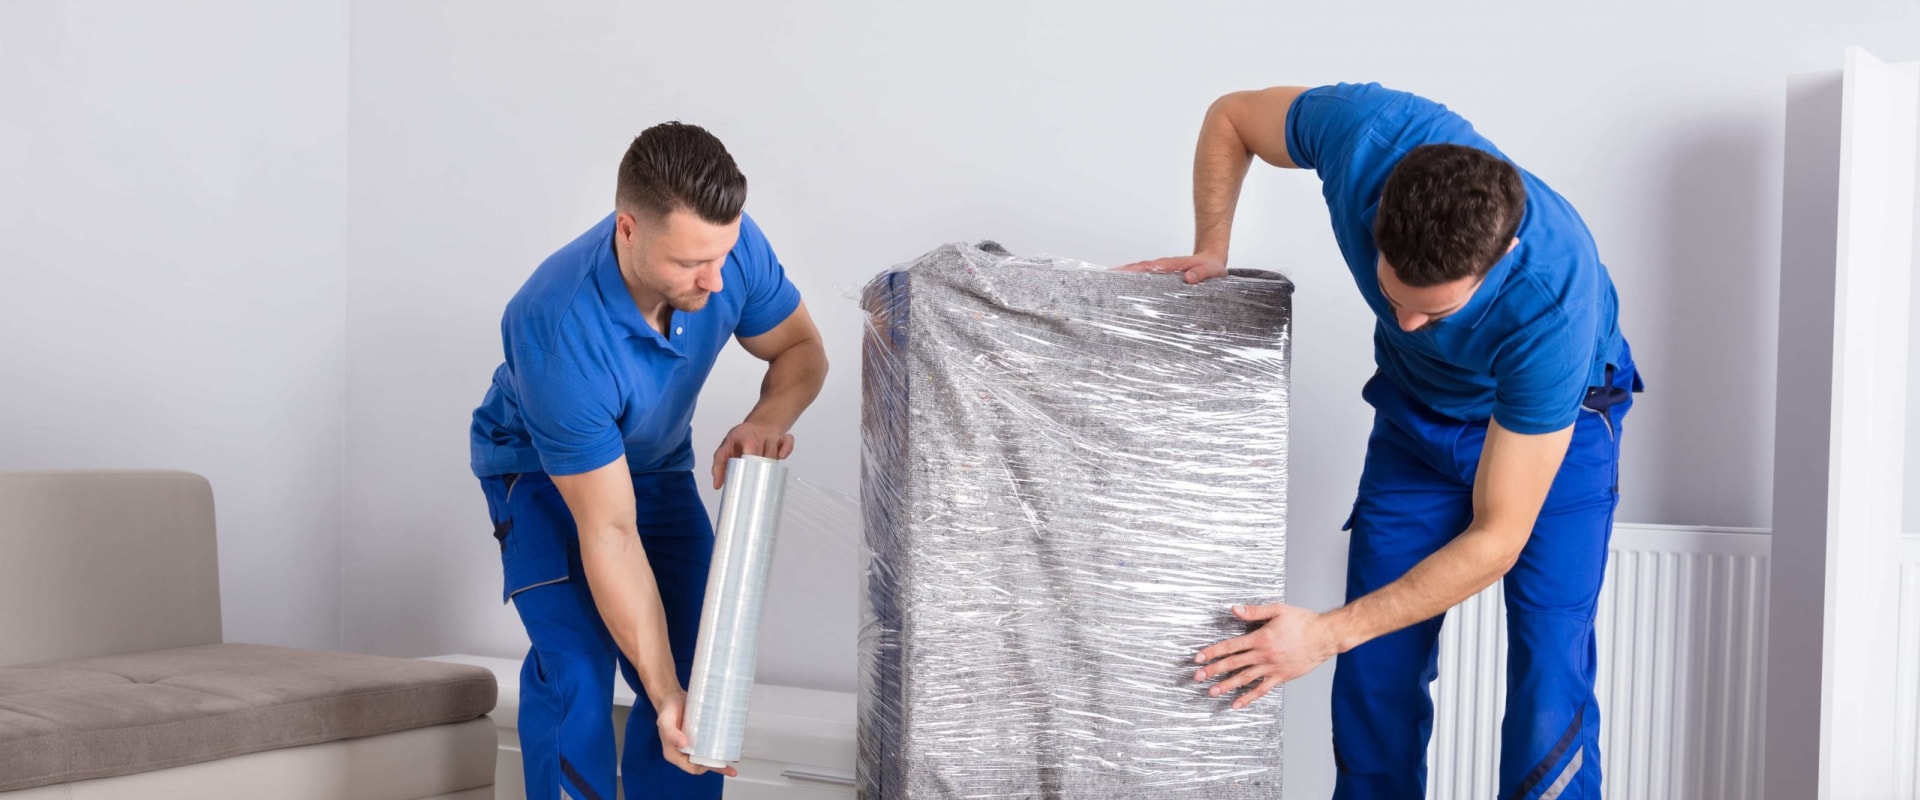 The Importance of Insurance When Hiring a Moving Company